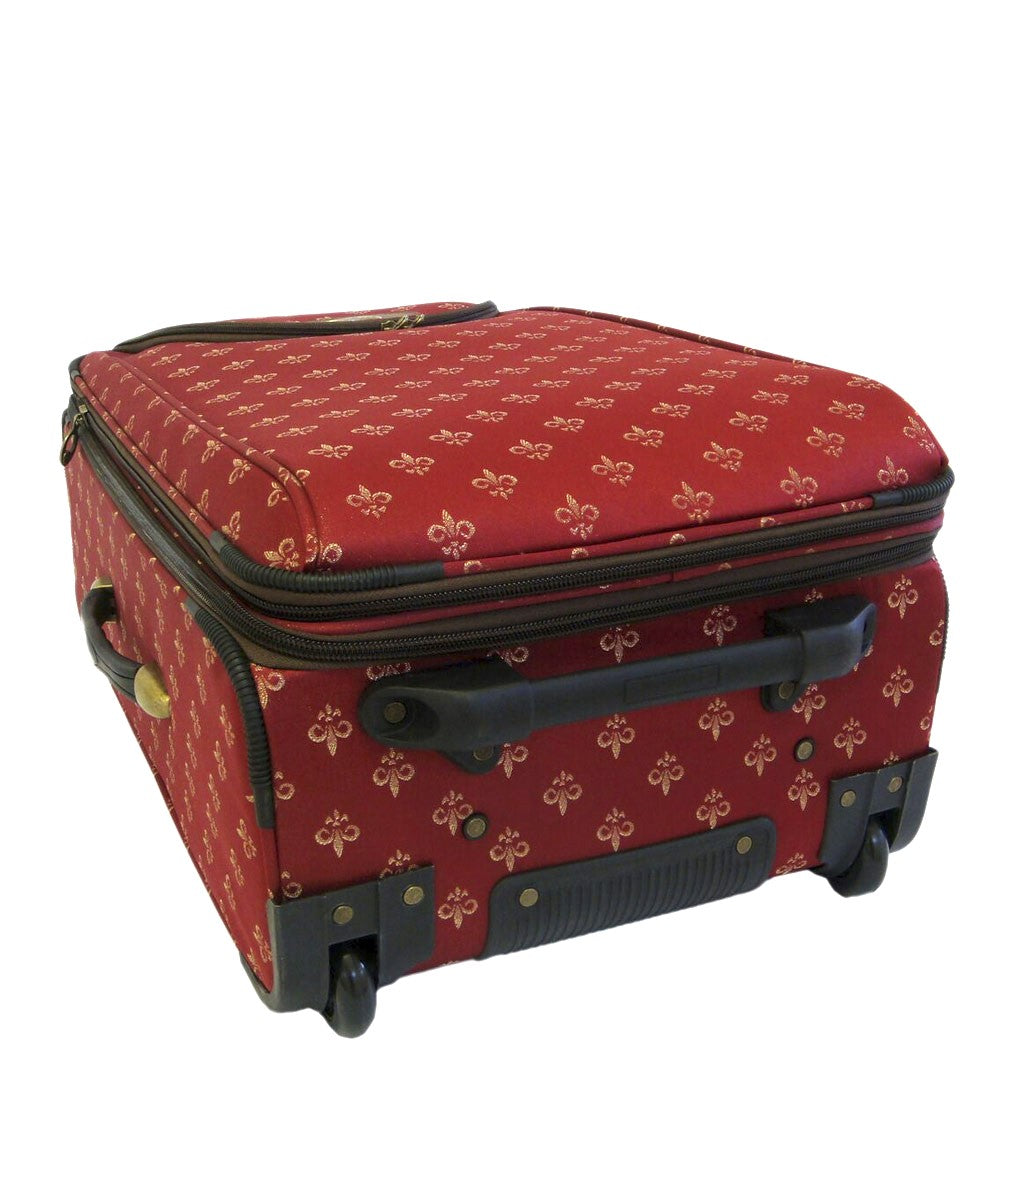 American Flyer Lyon 4-pc. Expandable Upright Luggage Set, Color: Red -  JCPenney